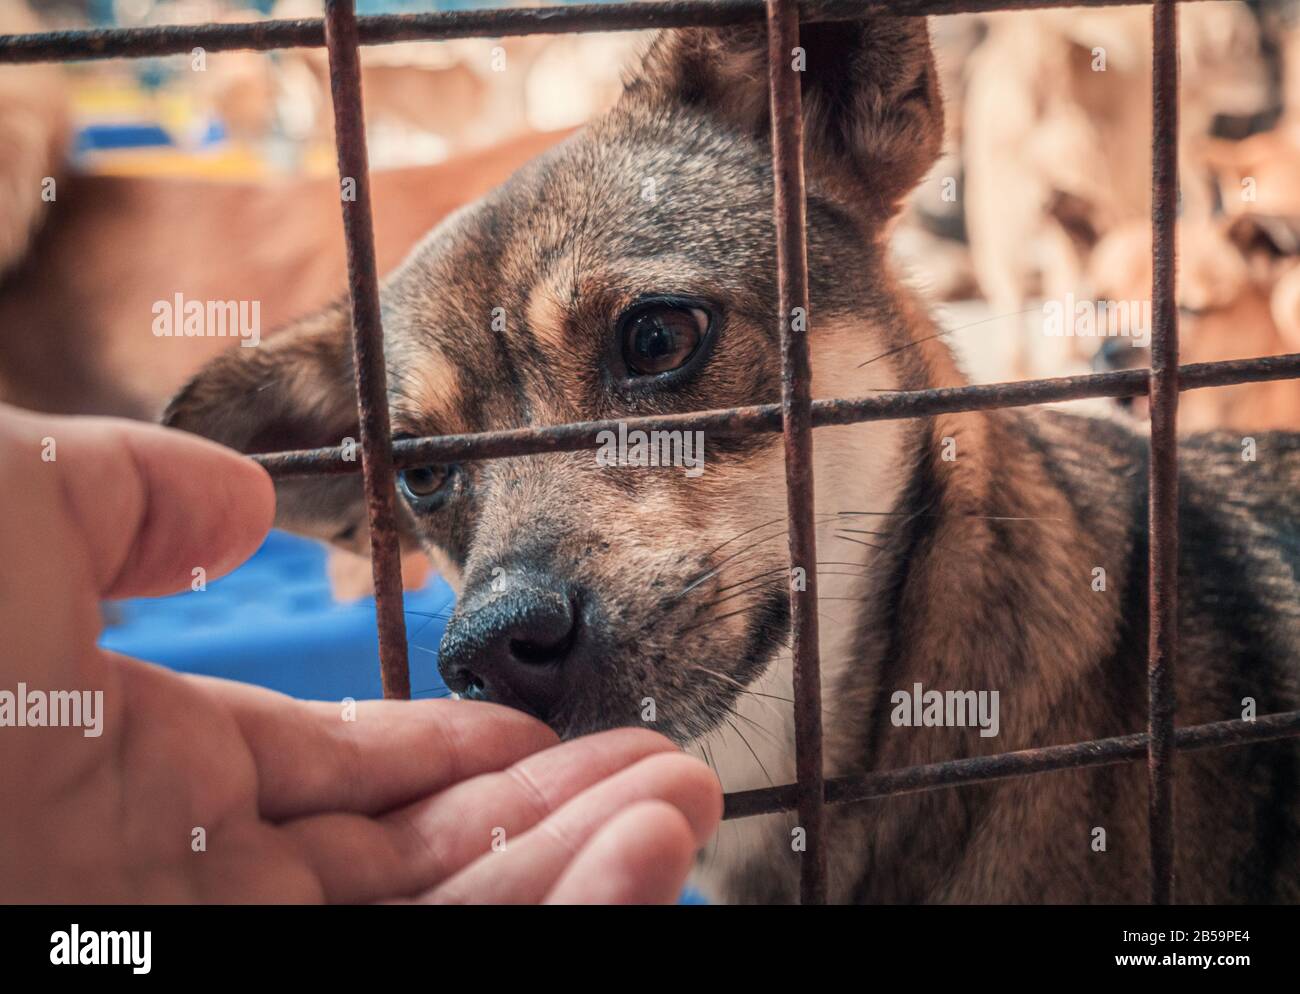 Close-up of male hand petting caged stray dog in pet shelter. People, Animals, Volunteering And Helping Concept. Stock Photo